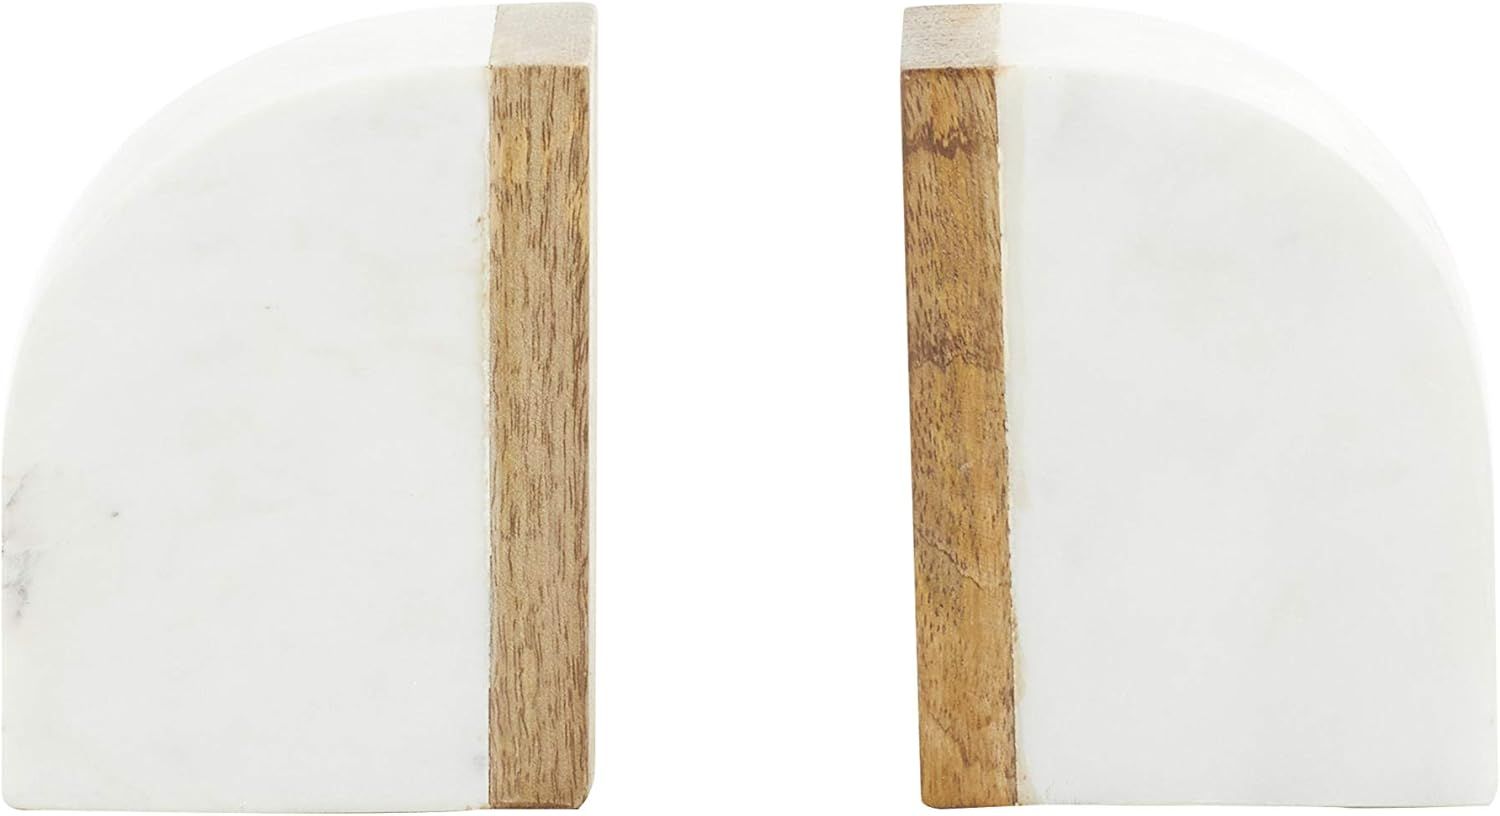 Deco 79 Marble Bookends with Wood Details, Set of 2 4"W, 5"H, White | Amazon (US)